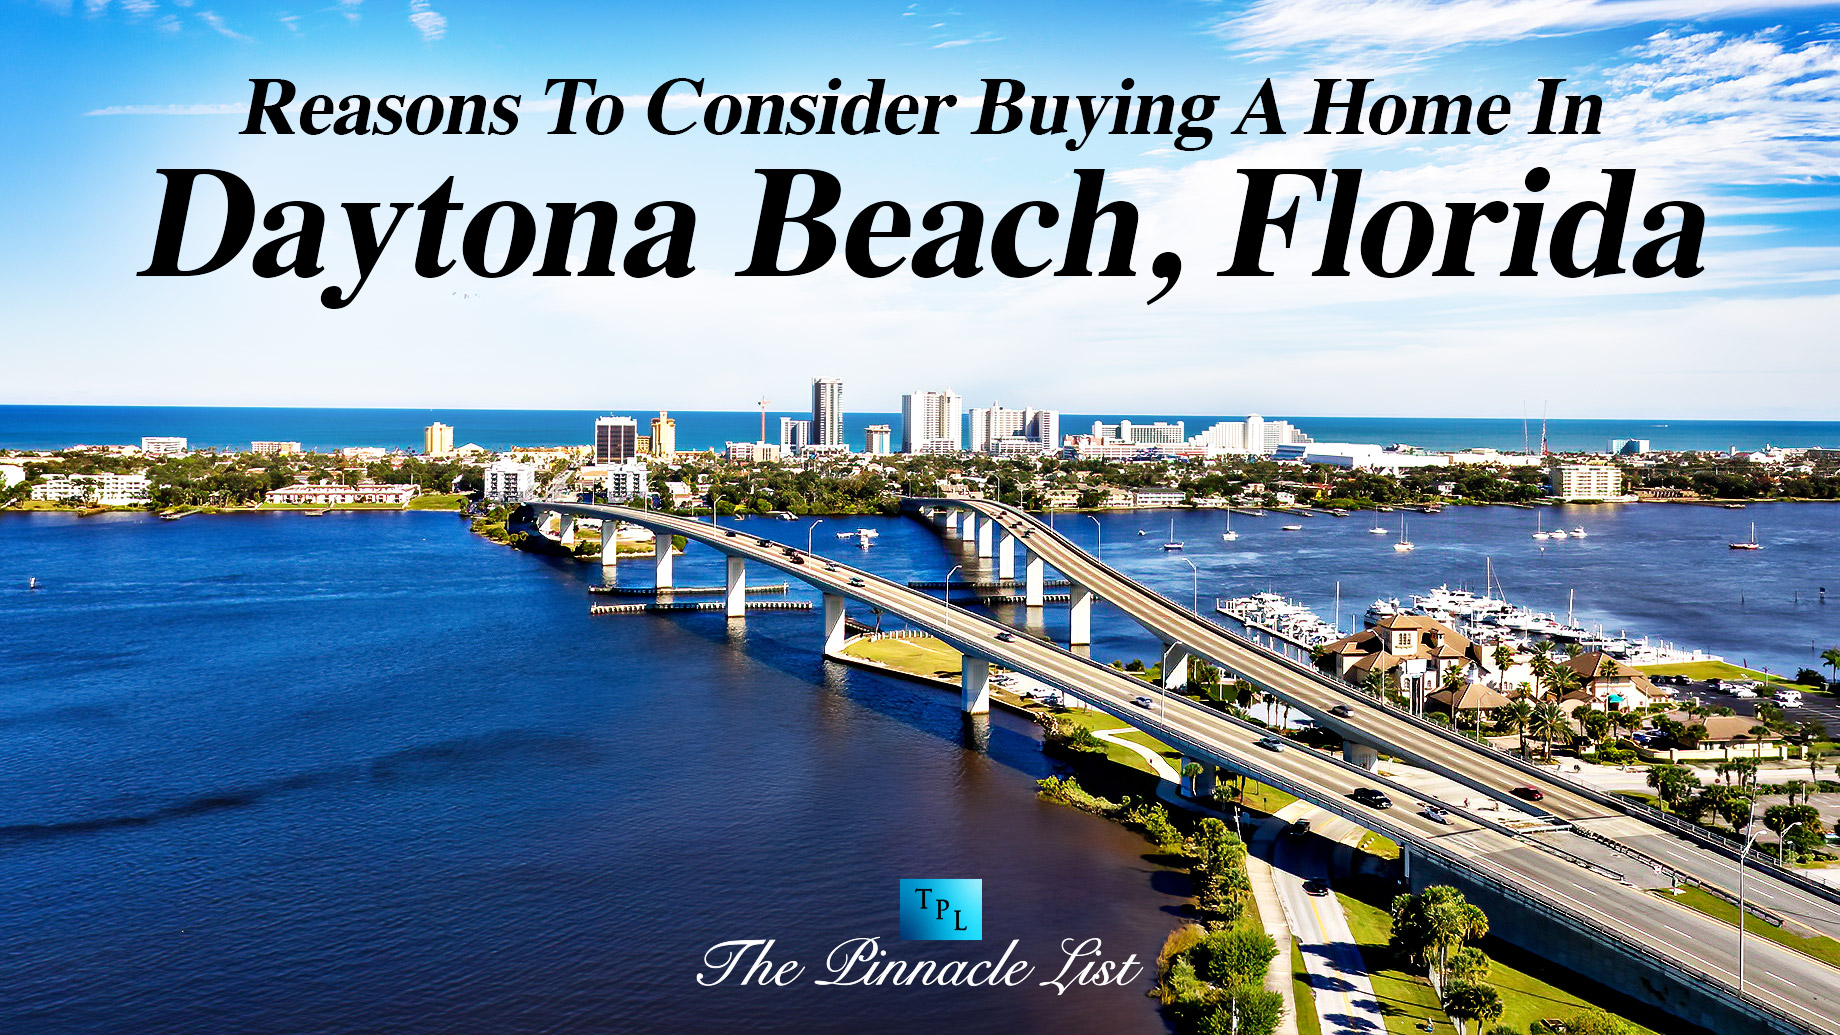 Reasons To Consider Buying A Home In Daytona Beach, Florida